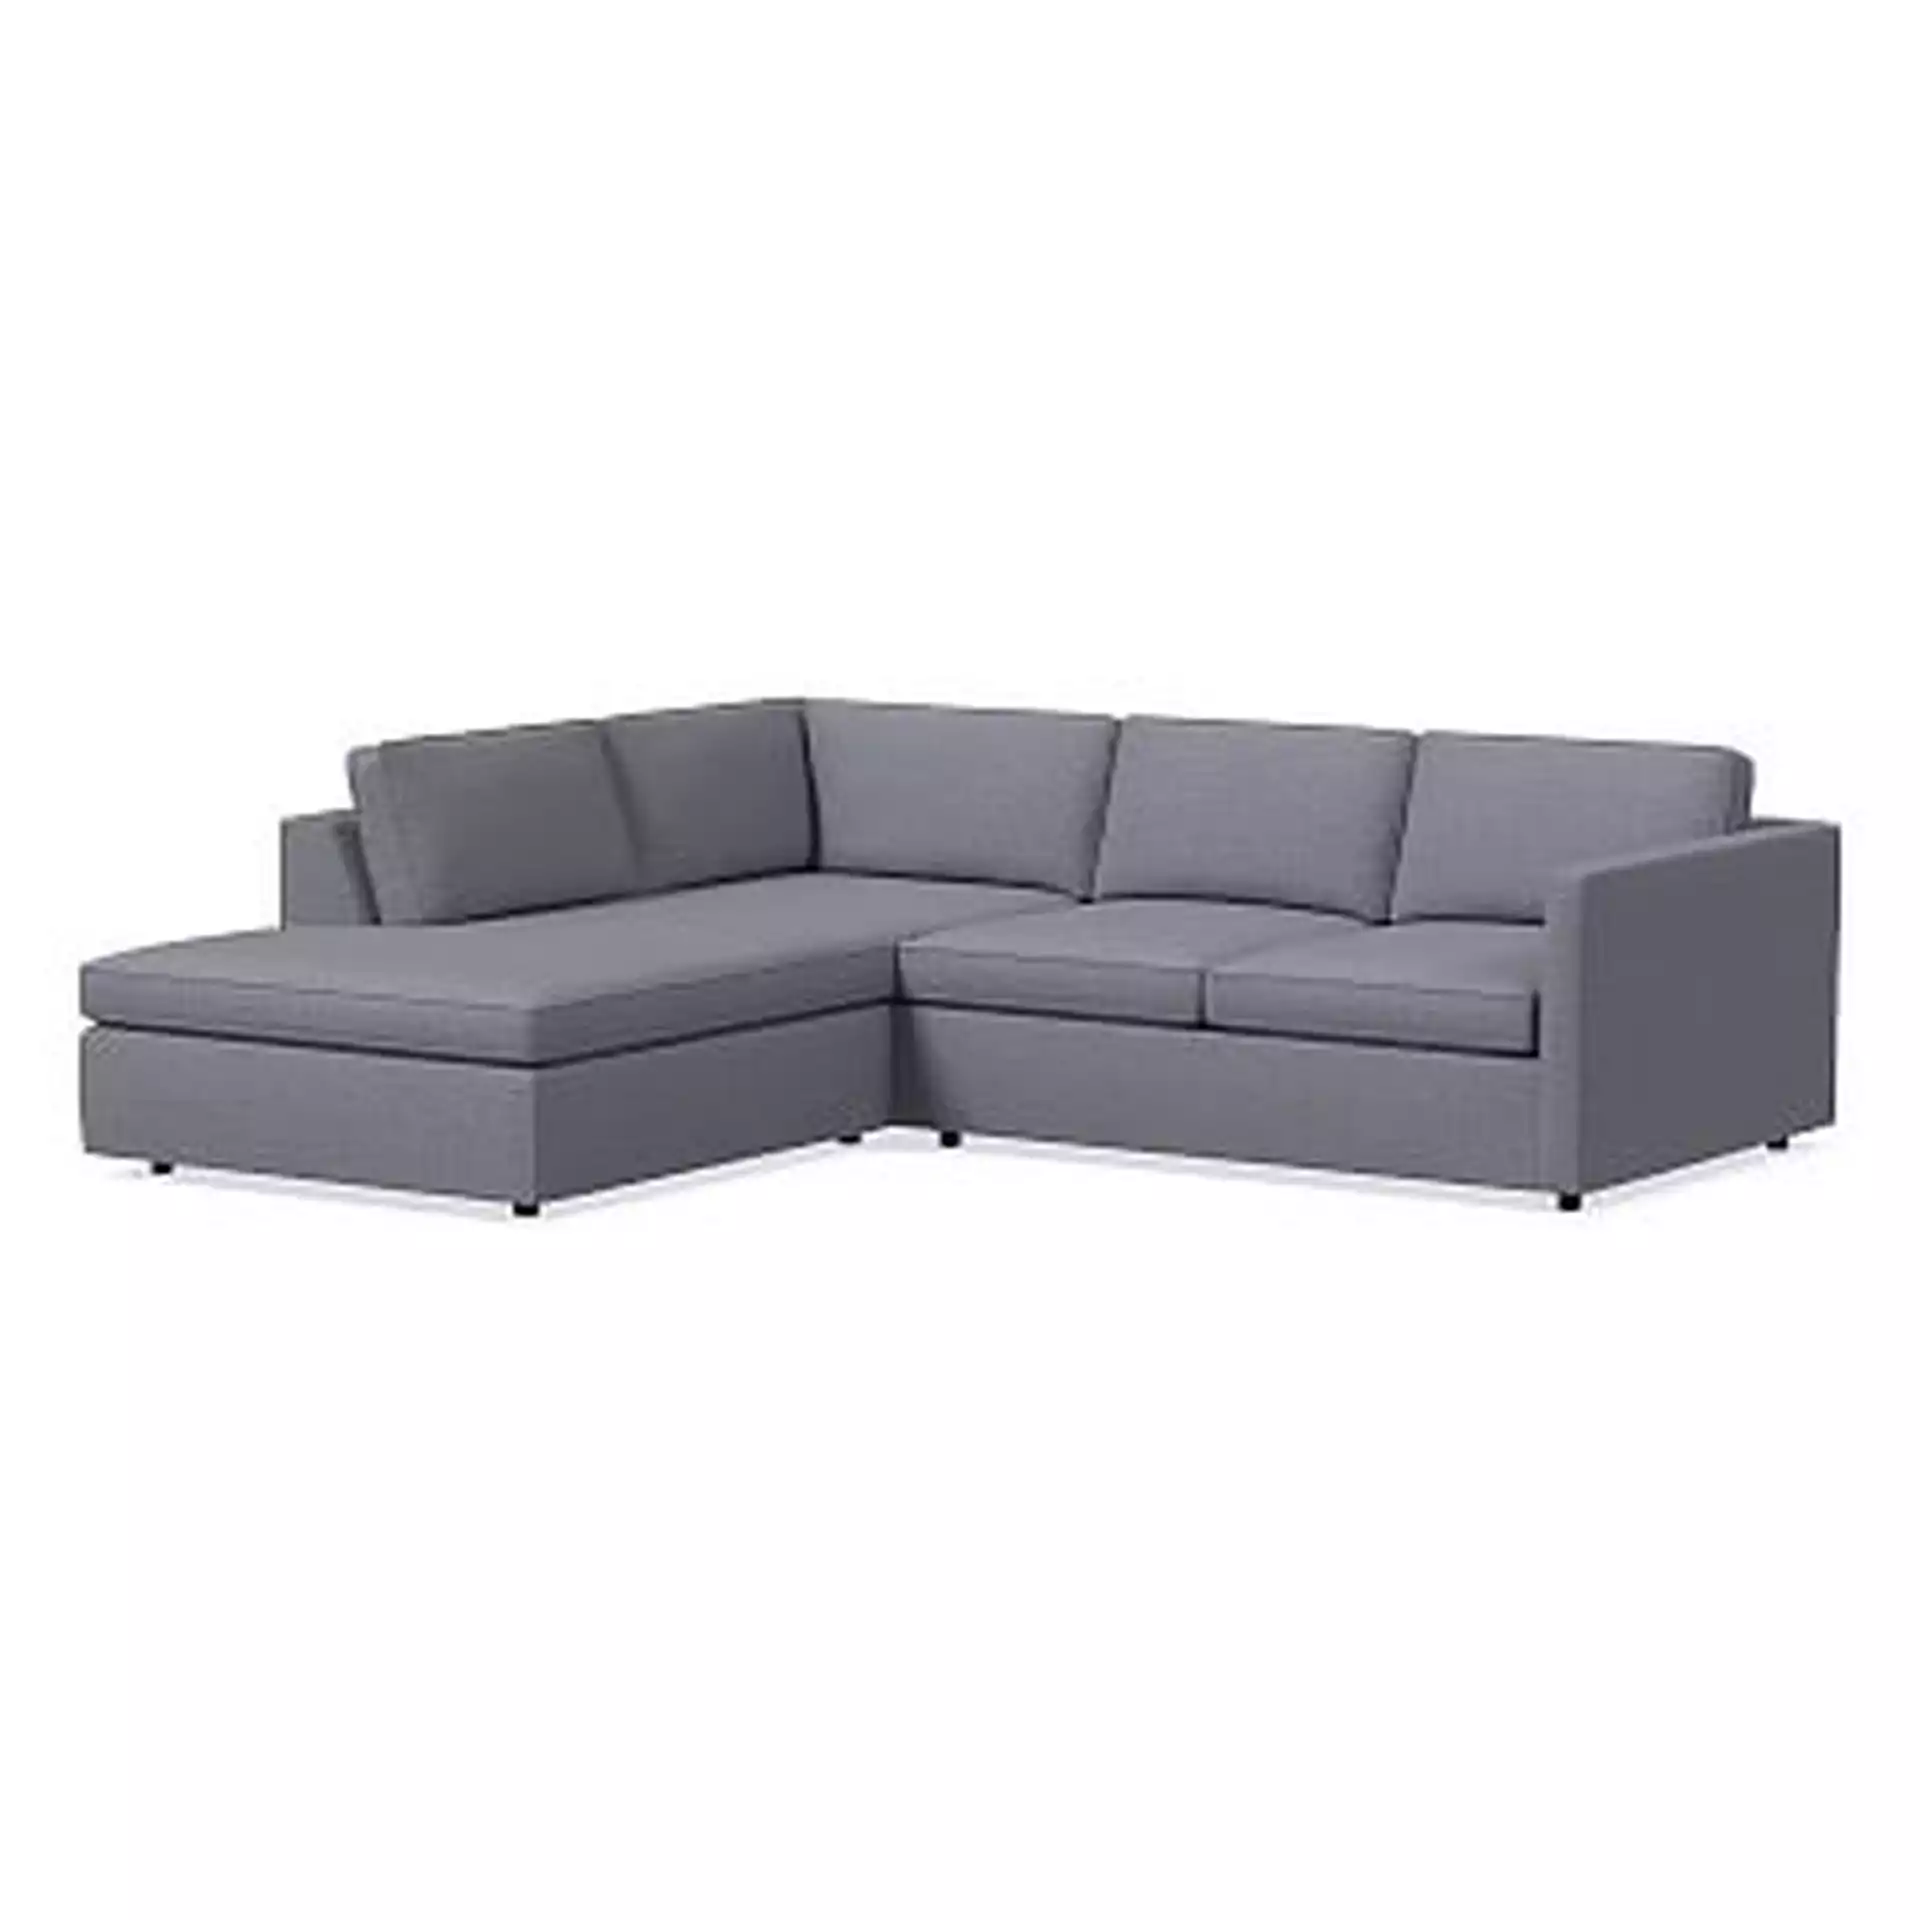 Harris Sectional Set 25: XL RA 65" Sofa, XL LA Terminal Chaise, Poly, Yarn Dyed Linen Weave, Graphite, Concealed Supports